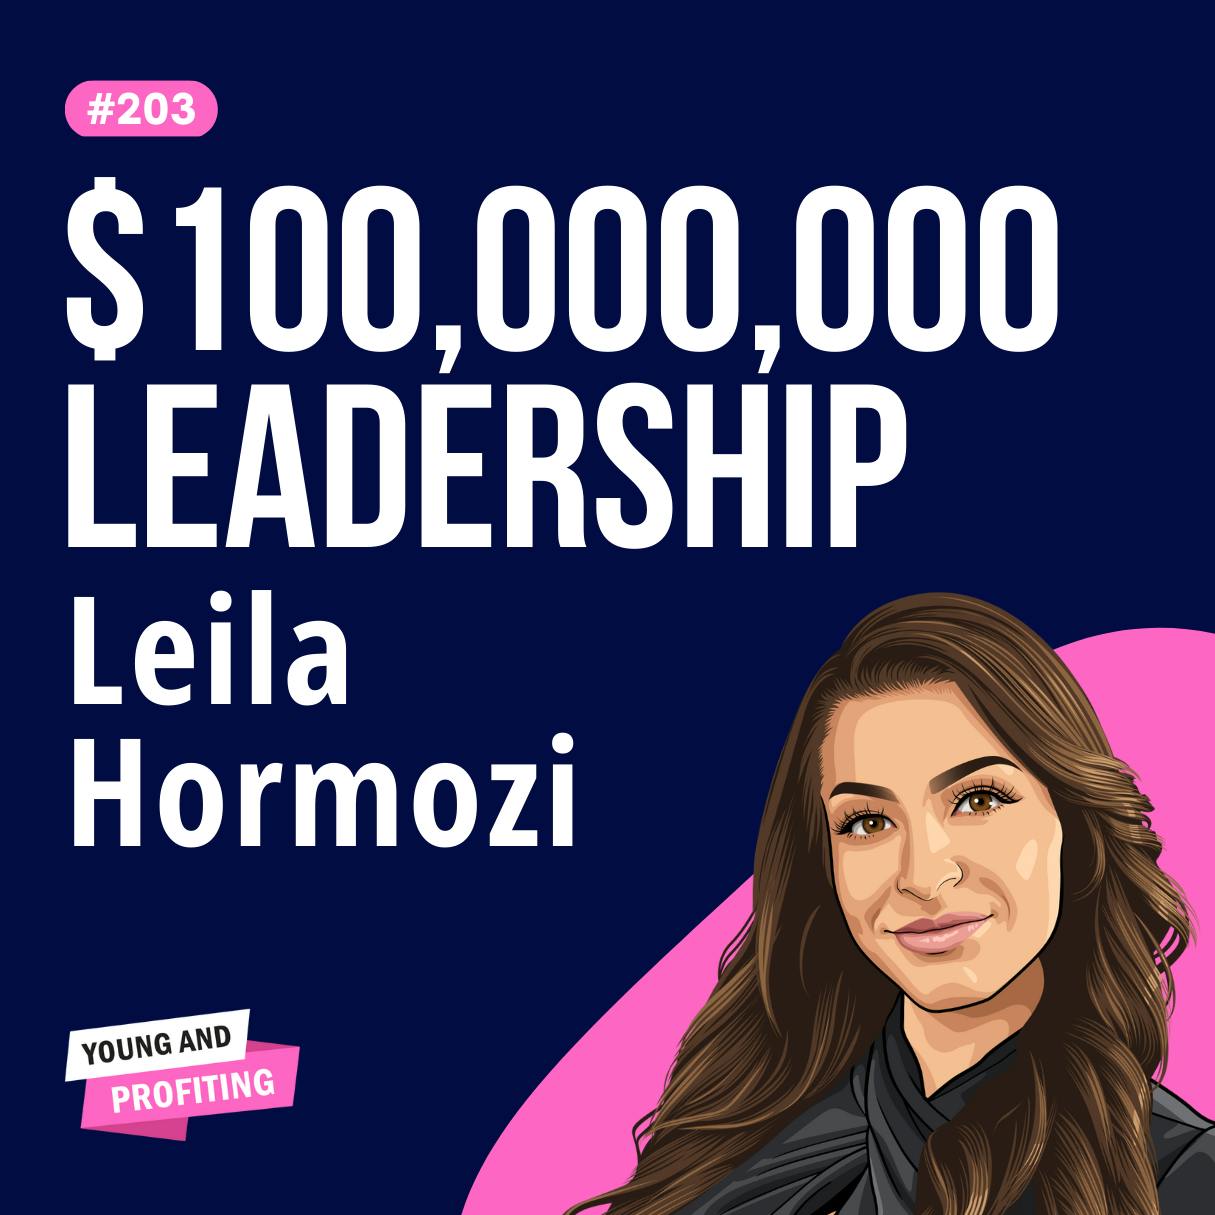 Leila Hormozi: $100,000,000 Leadership, How to Build High-Performance Teams People Never Want to Leave | E203